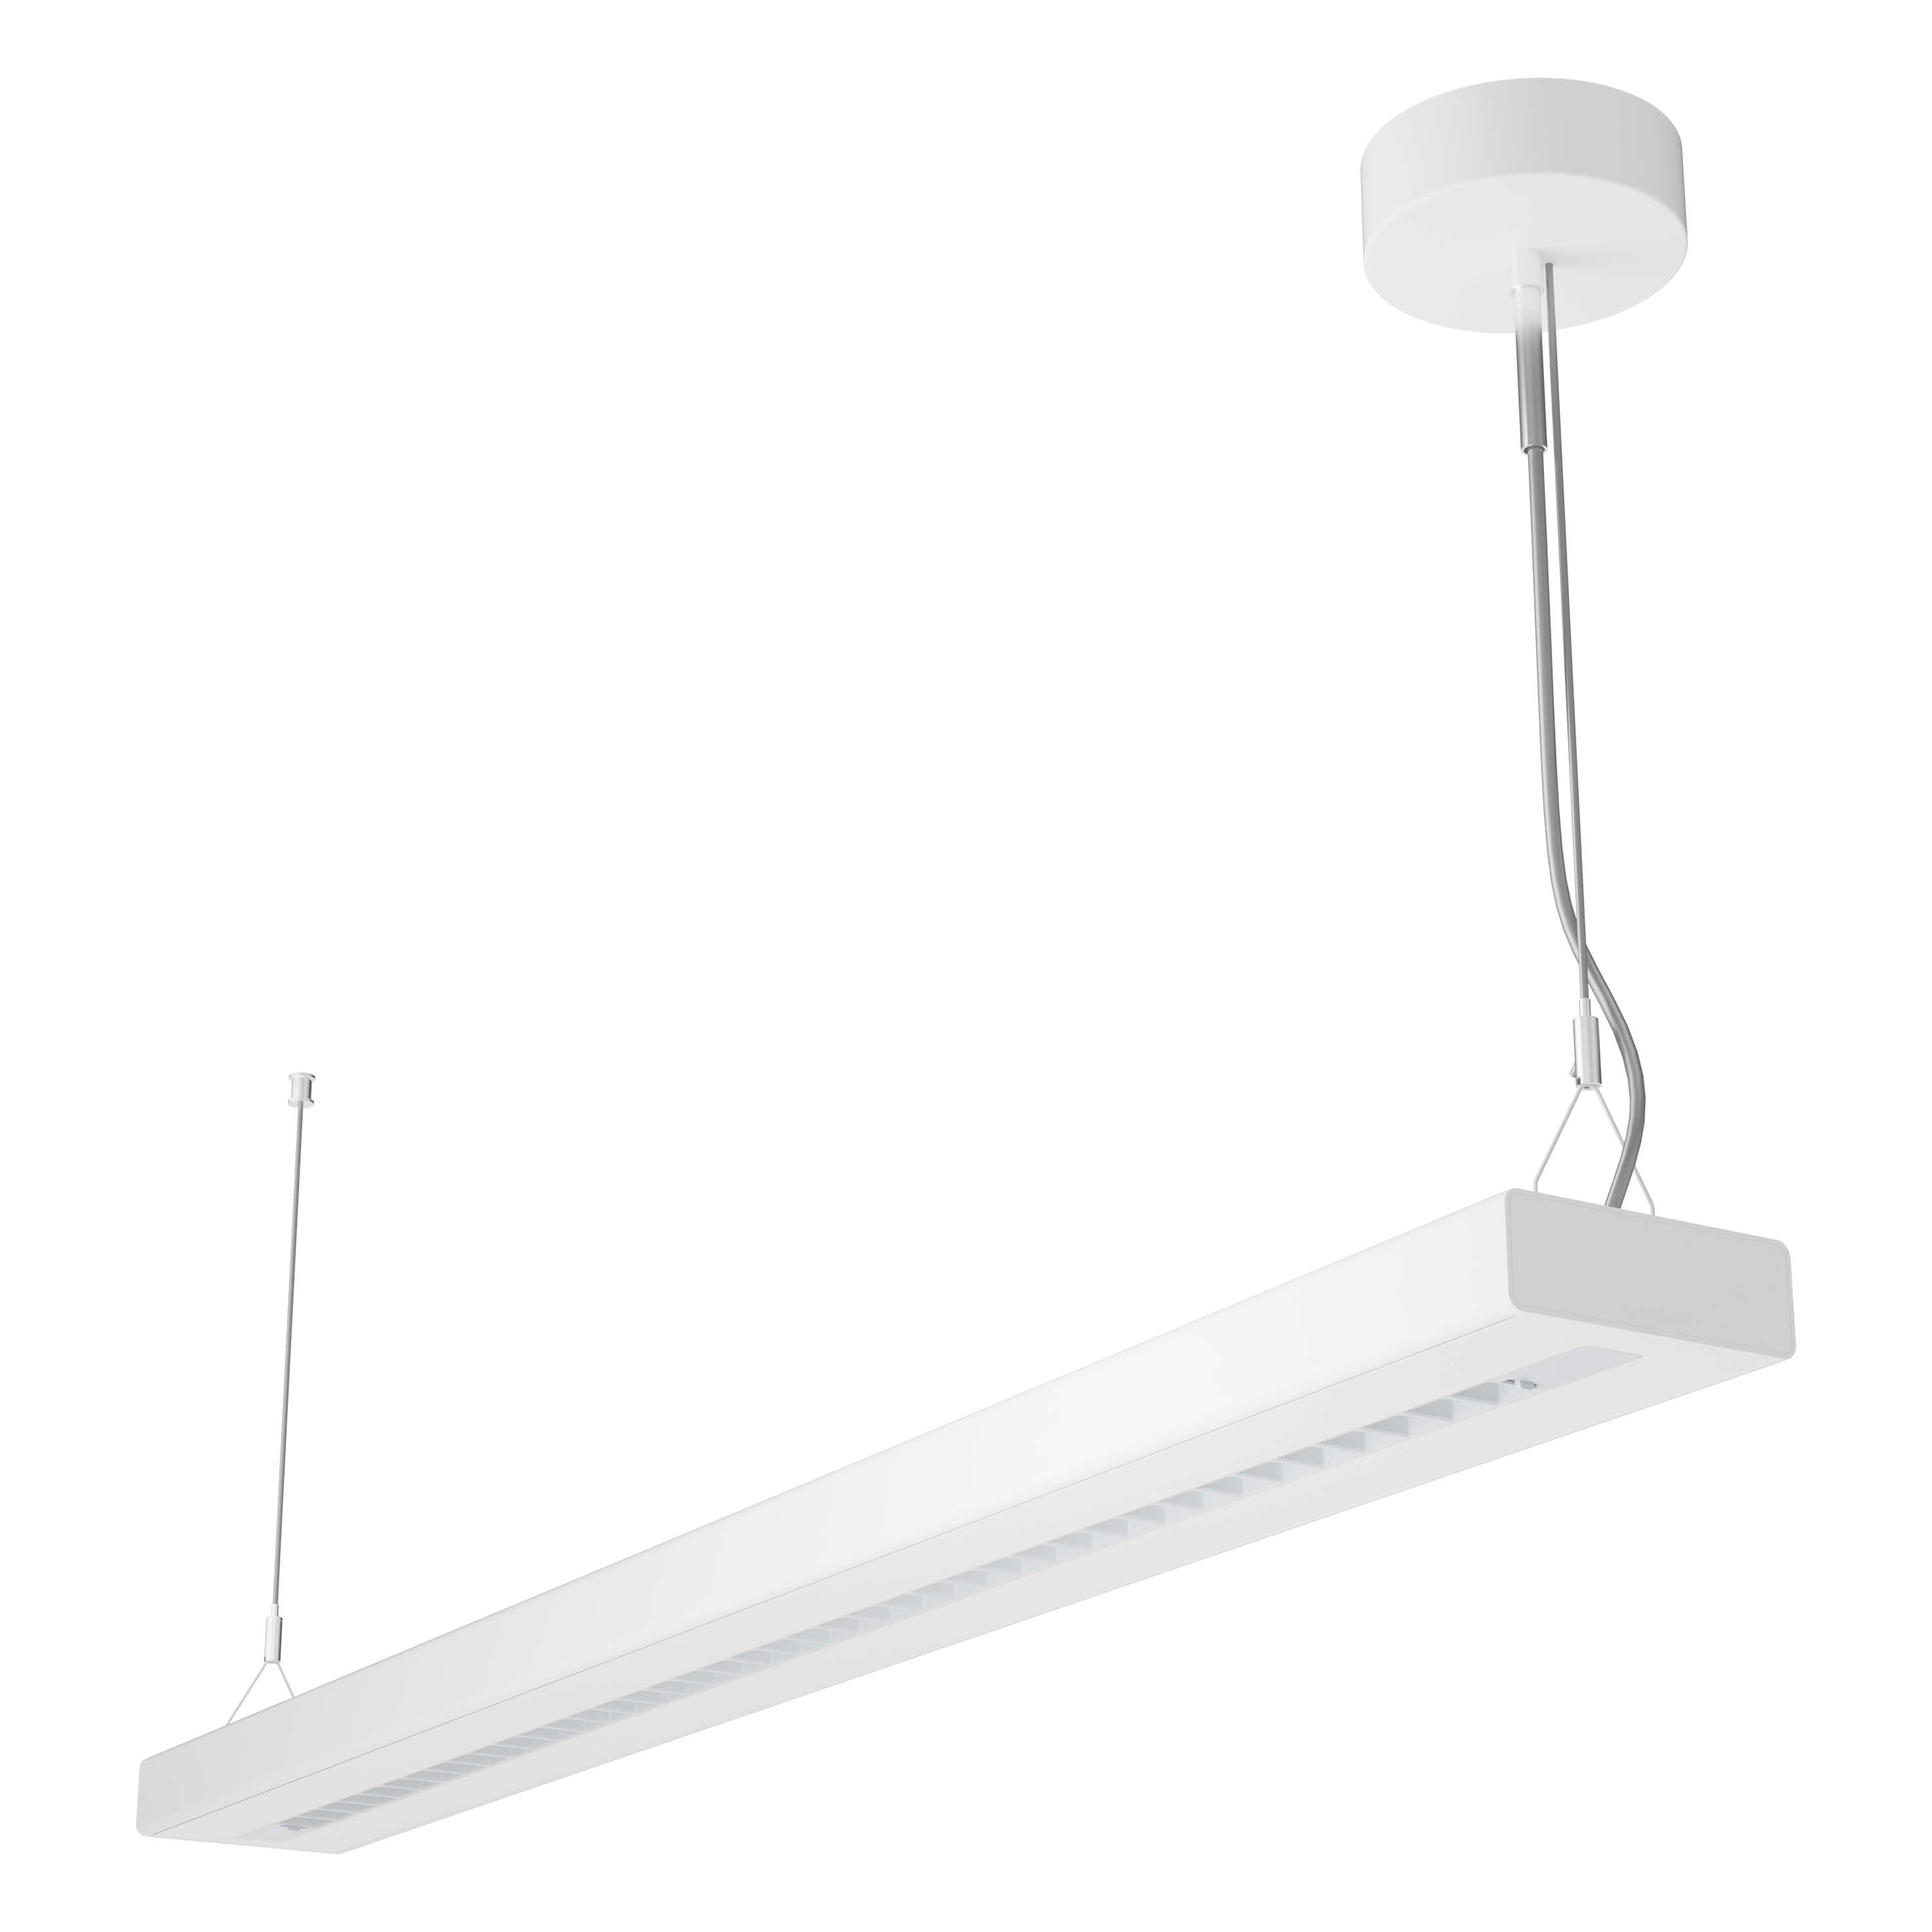 LEDVANCE LINEAR INDIVILED DIRECT/INDIRECT 1500 P 69W 940 PS WT